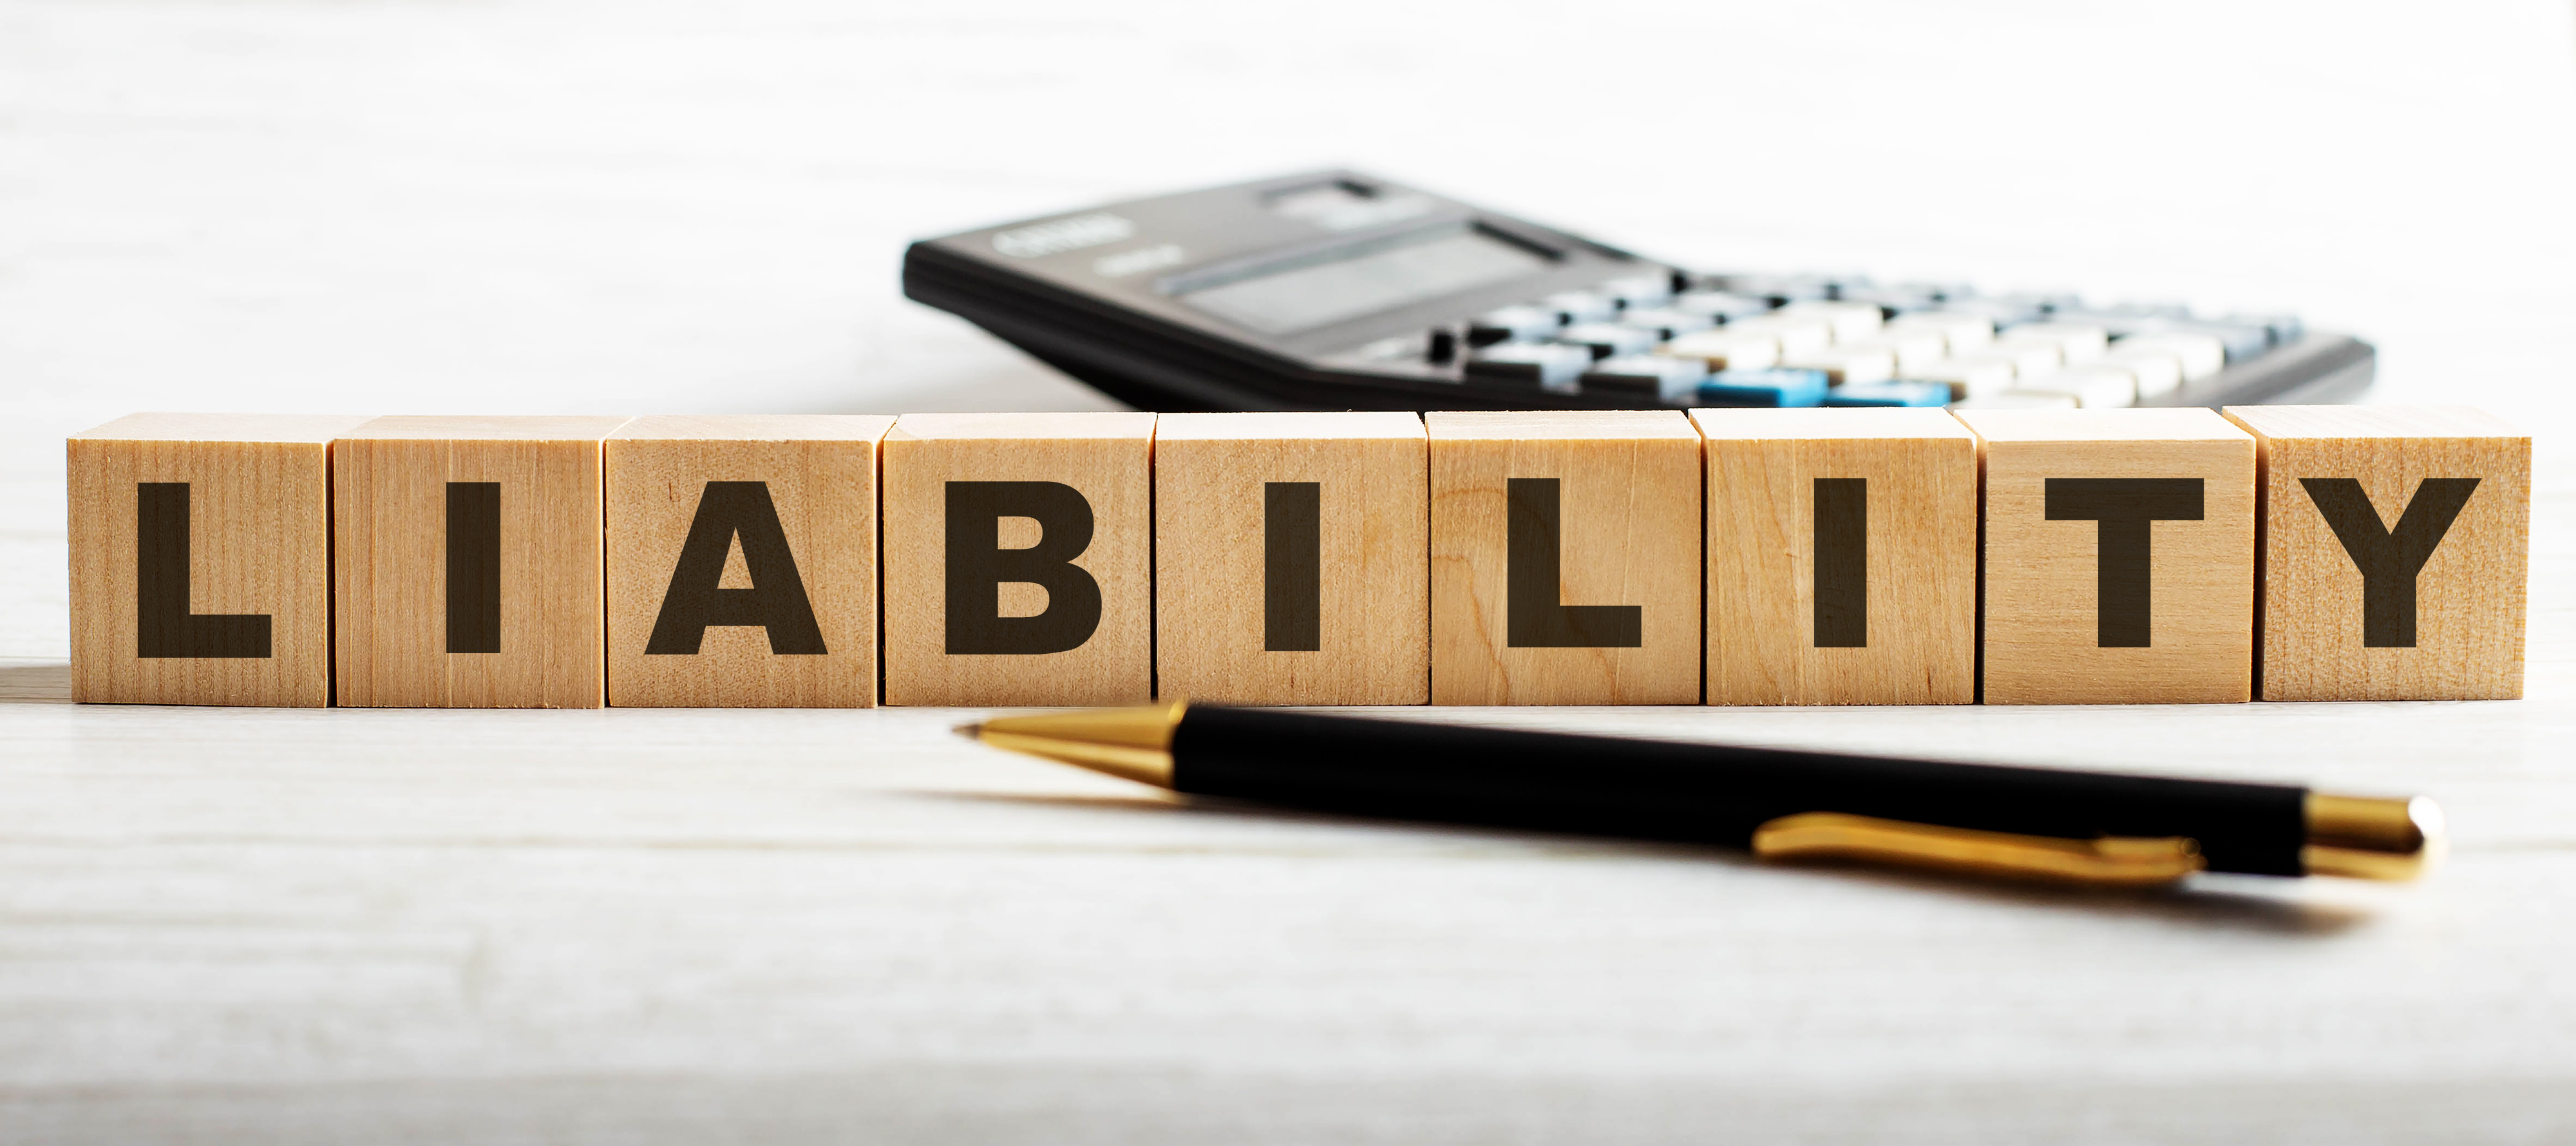 The word Liability spelled out with blocks